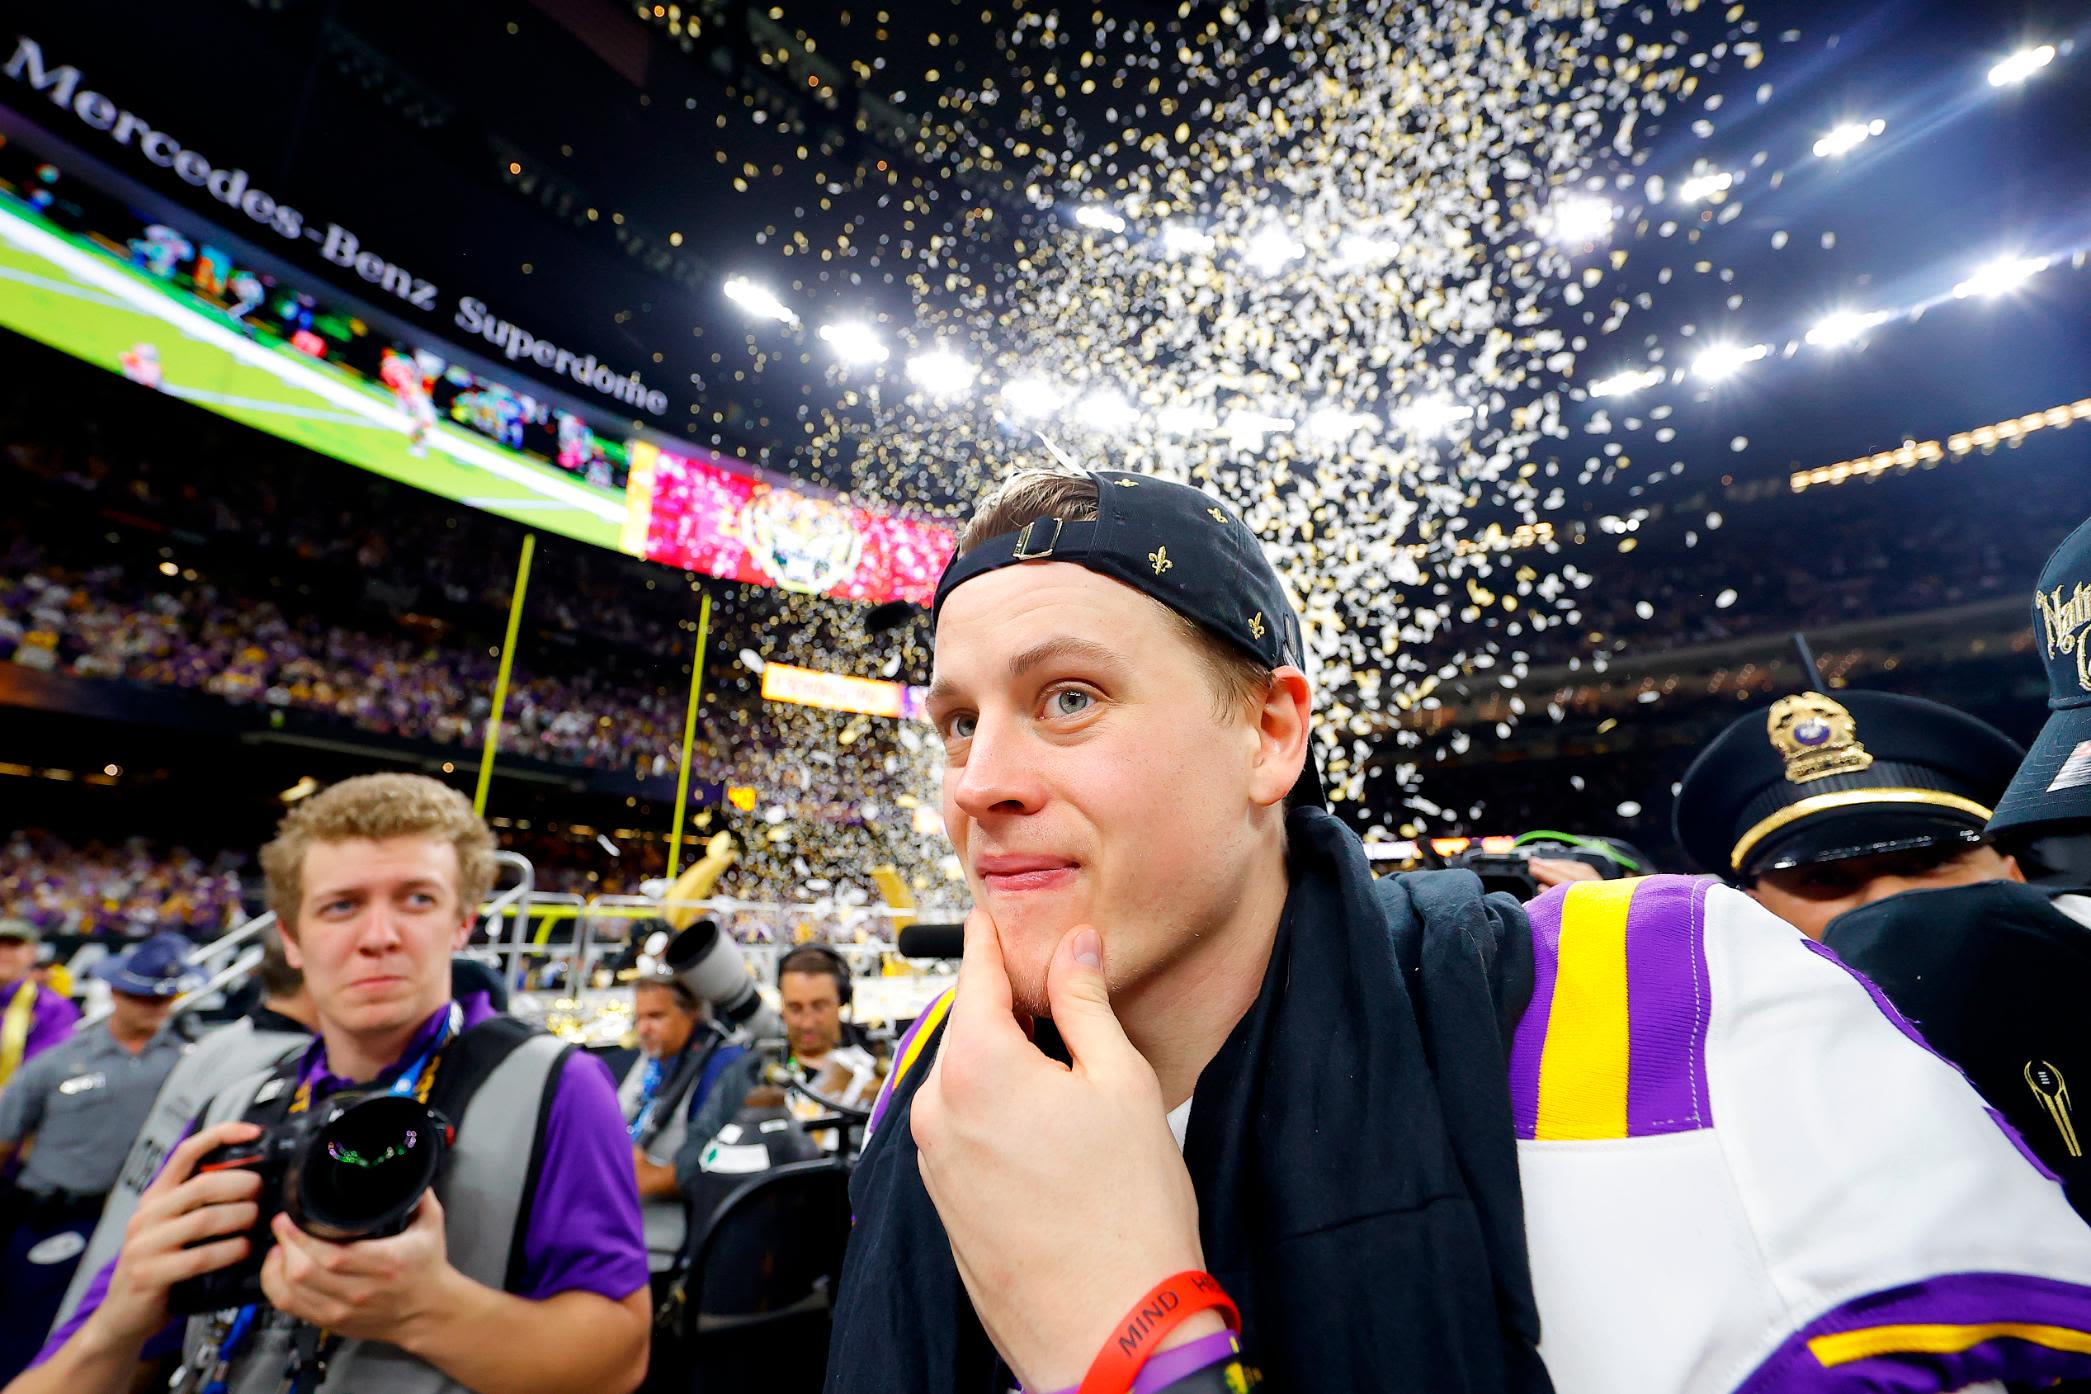 Joe Burrow: from back-up quarterback to likely NFL No 1 overall pick, College football